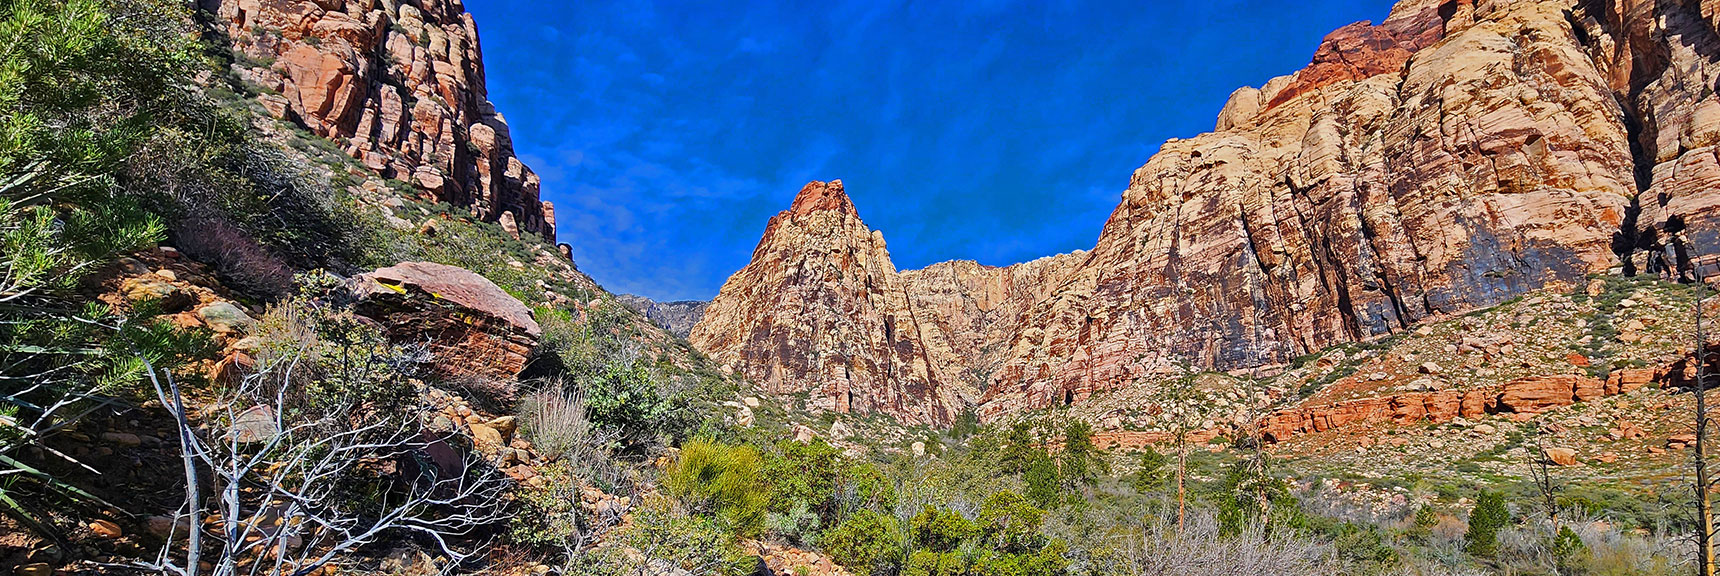 The Impressive Mescalito Pyramid Appears as The Knoll Trail Descends into Pine Creek Canyon | Knoll Trail | Red Rock Canyon, Nevada | David Smith | LasVegasAreaTrails.com